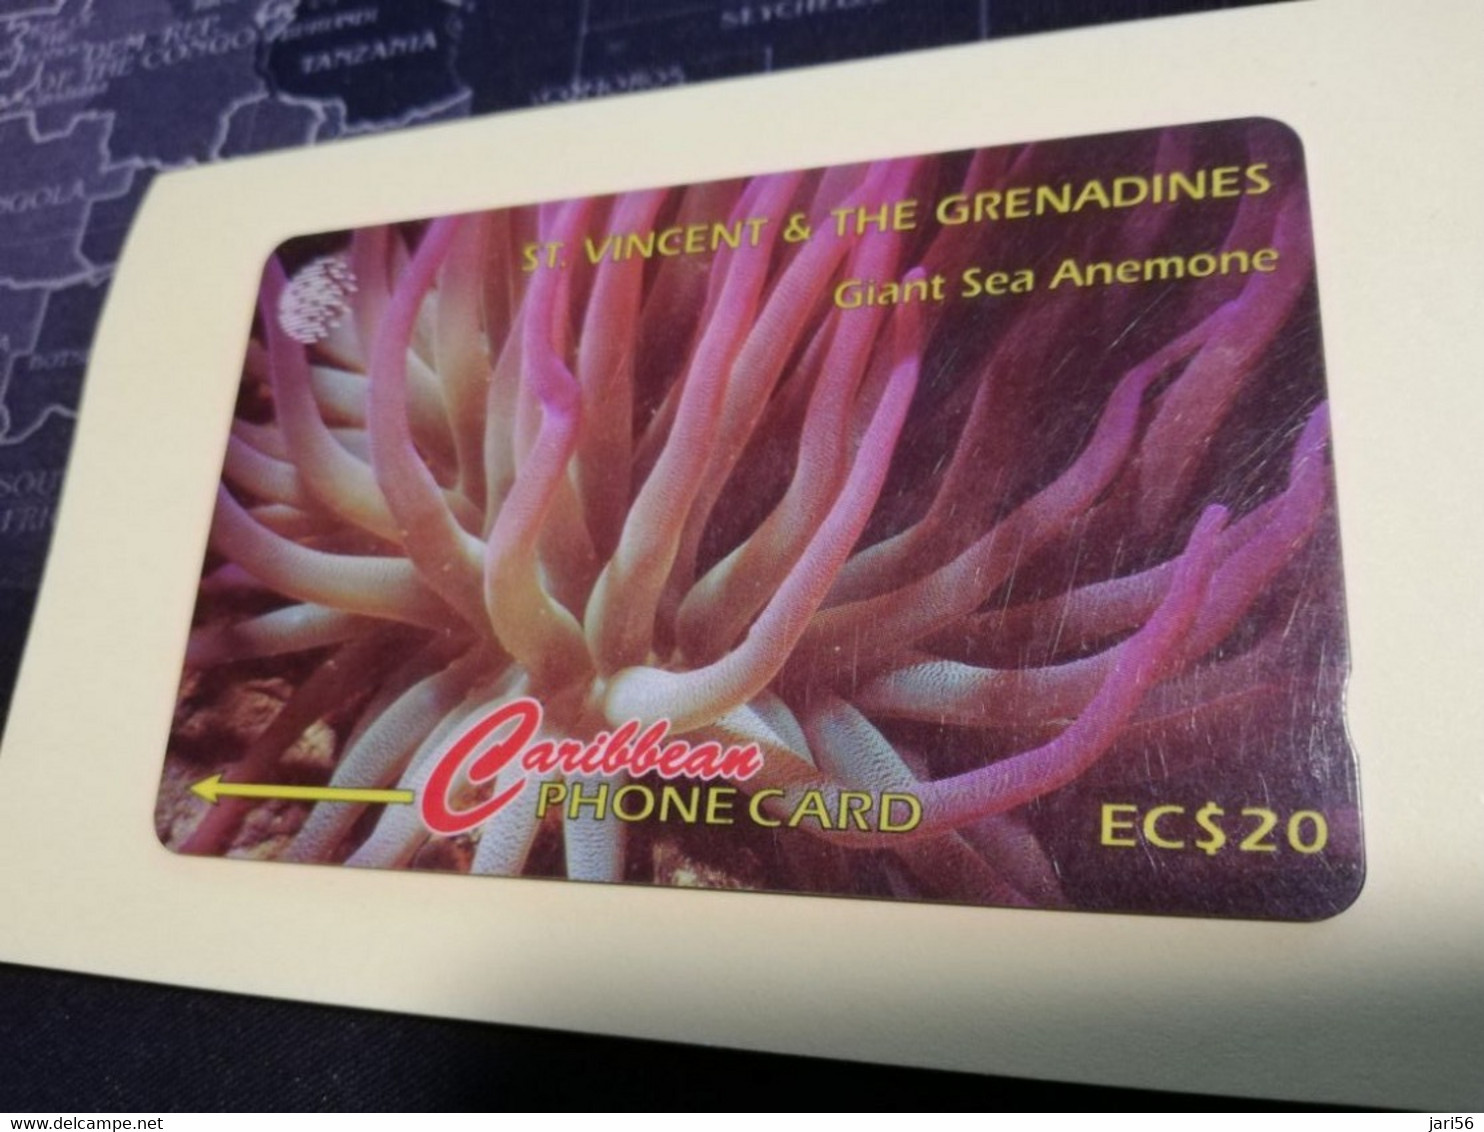 ST VINCENT & GRENADINES  GPT CARD   $ 20,- 142CSVC   GIANT SEA ANEMONE               C&W    Fine Used  Card  **3389** - St. Vincent & The Grenadines